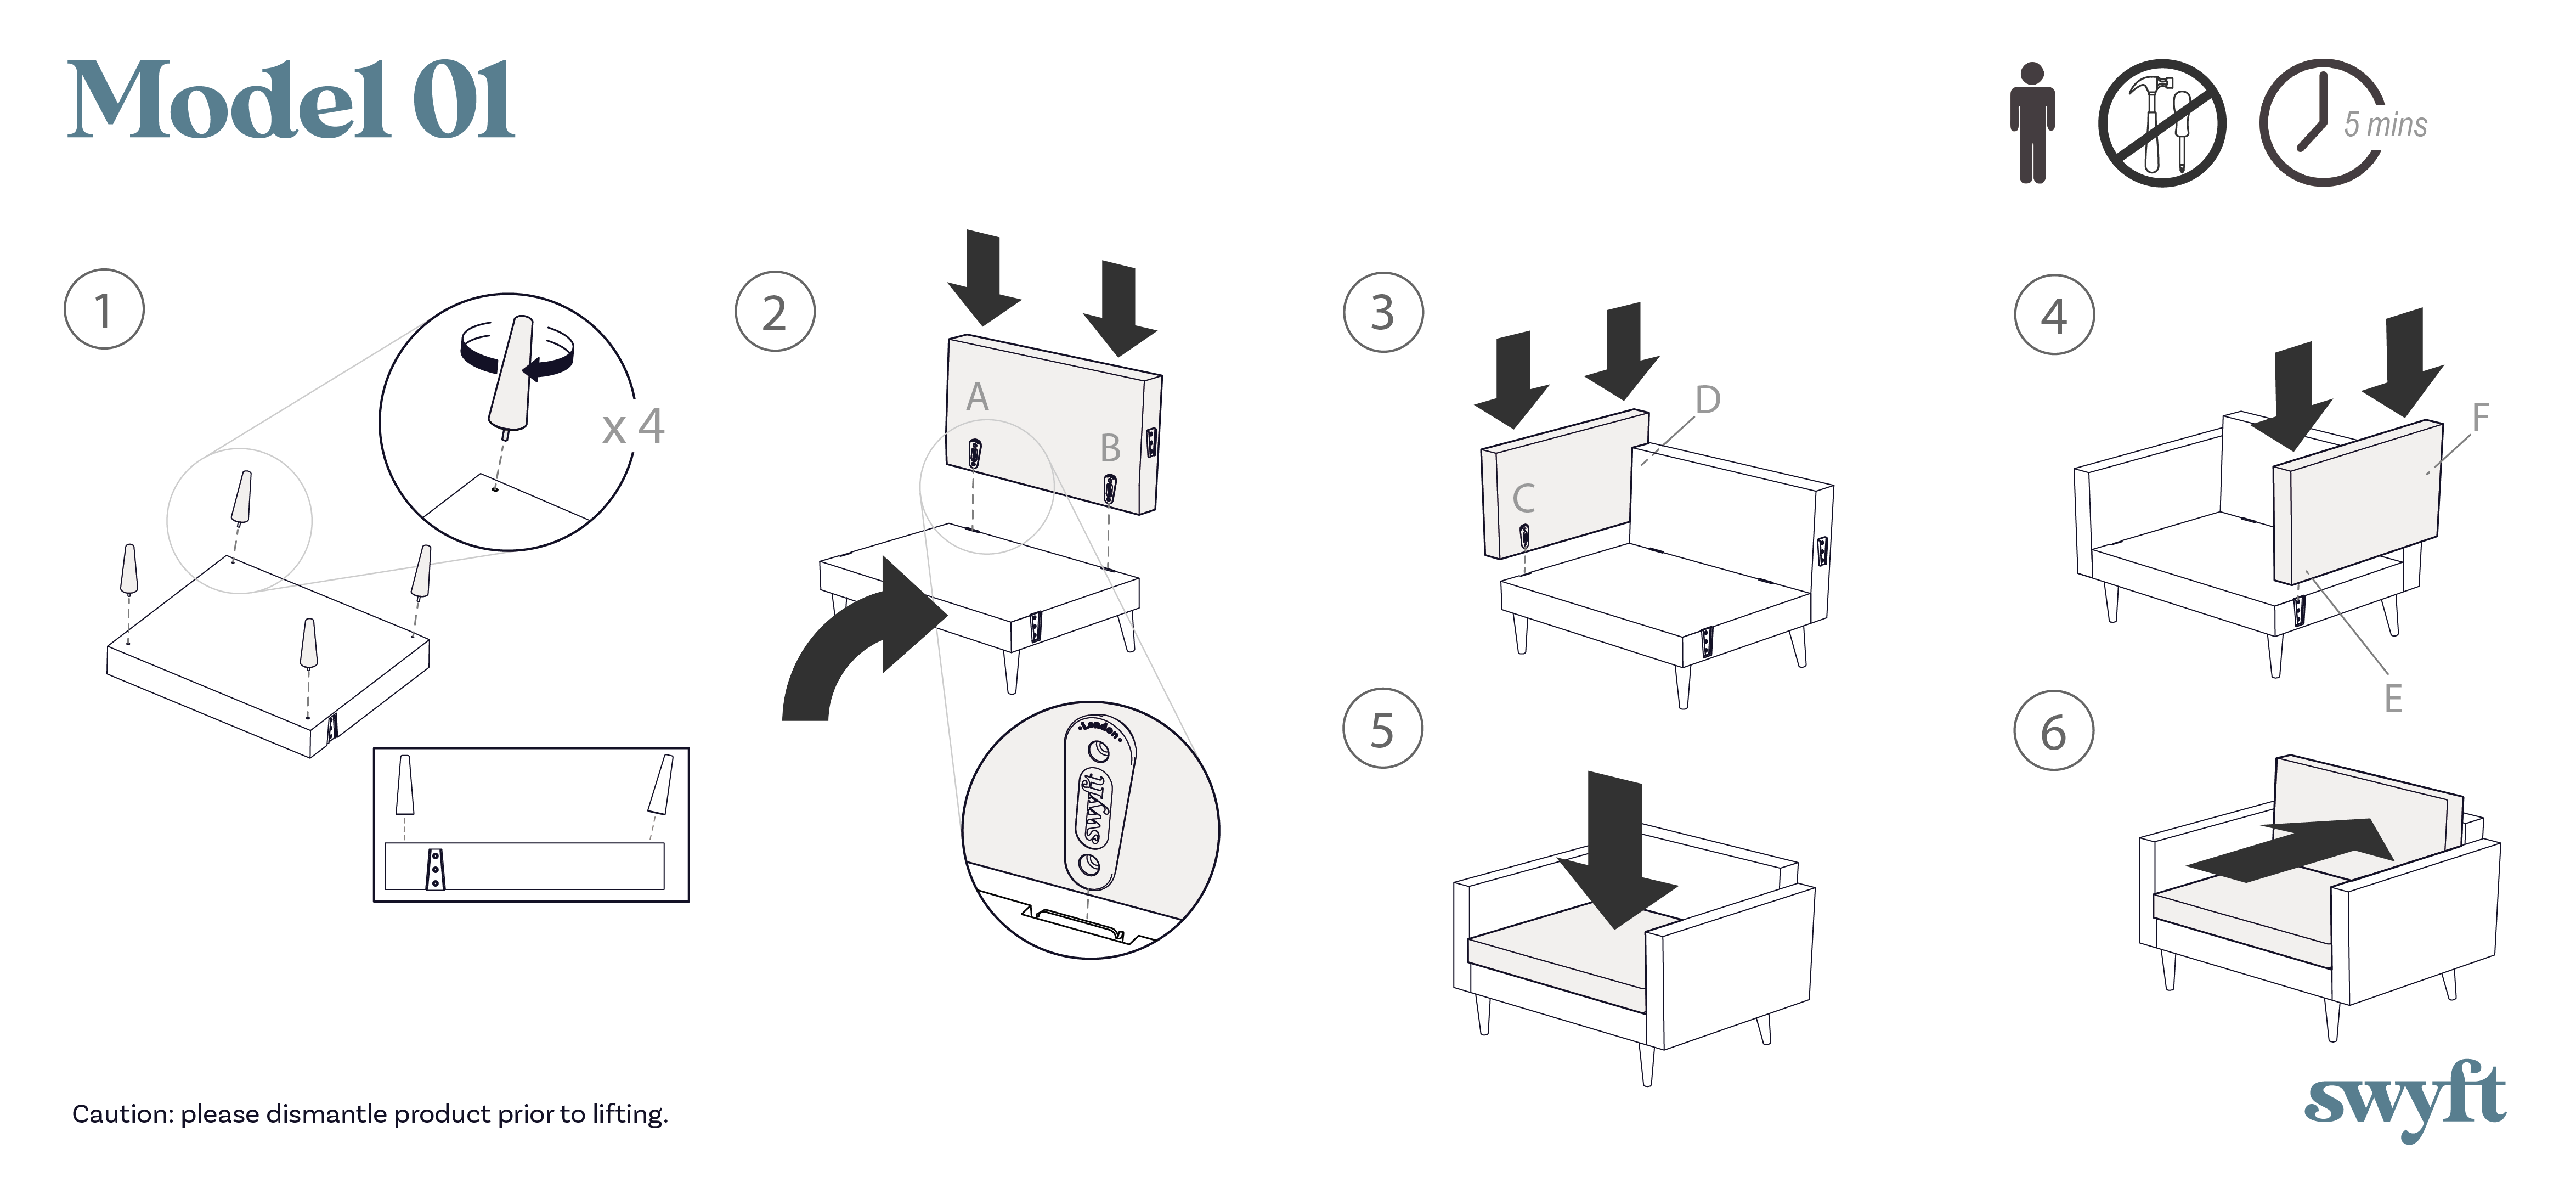 Model 01 Armchair assembly instruction drawings